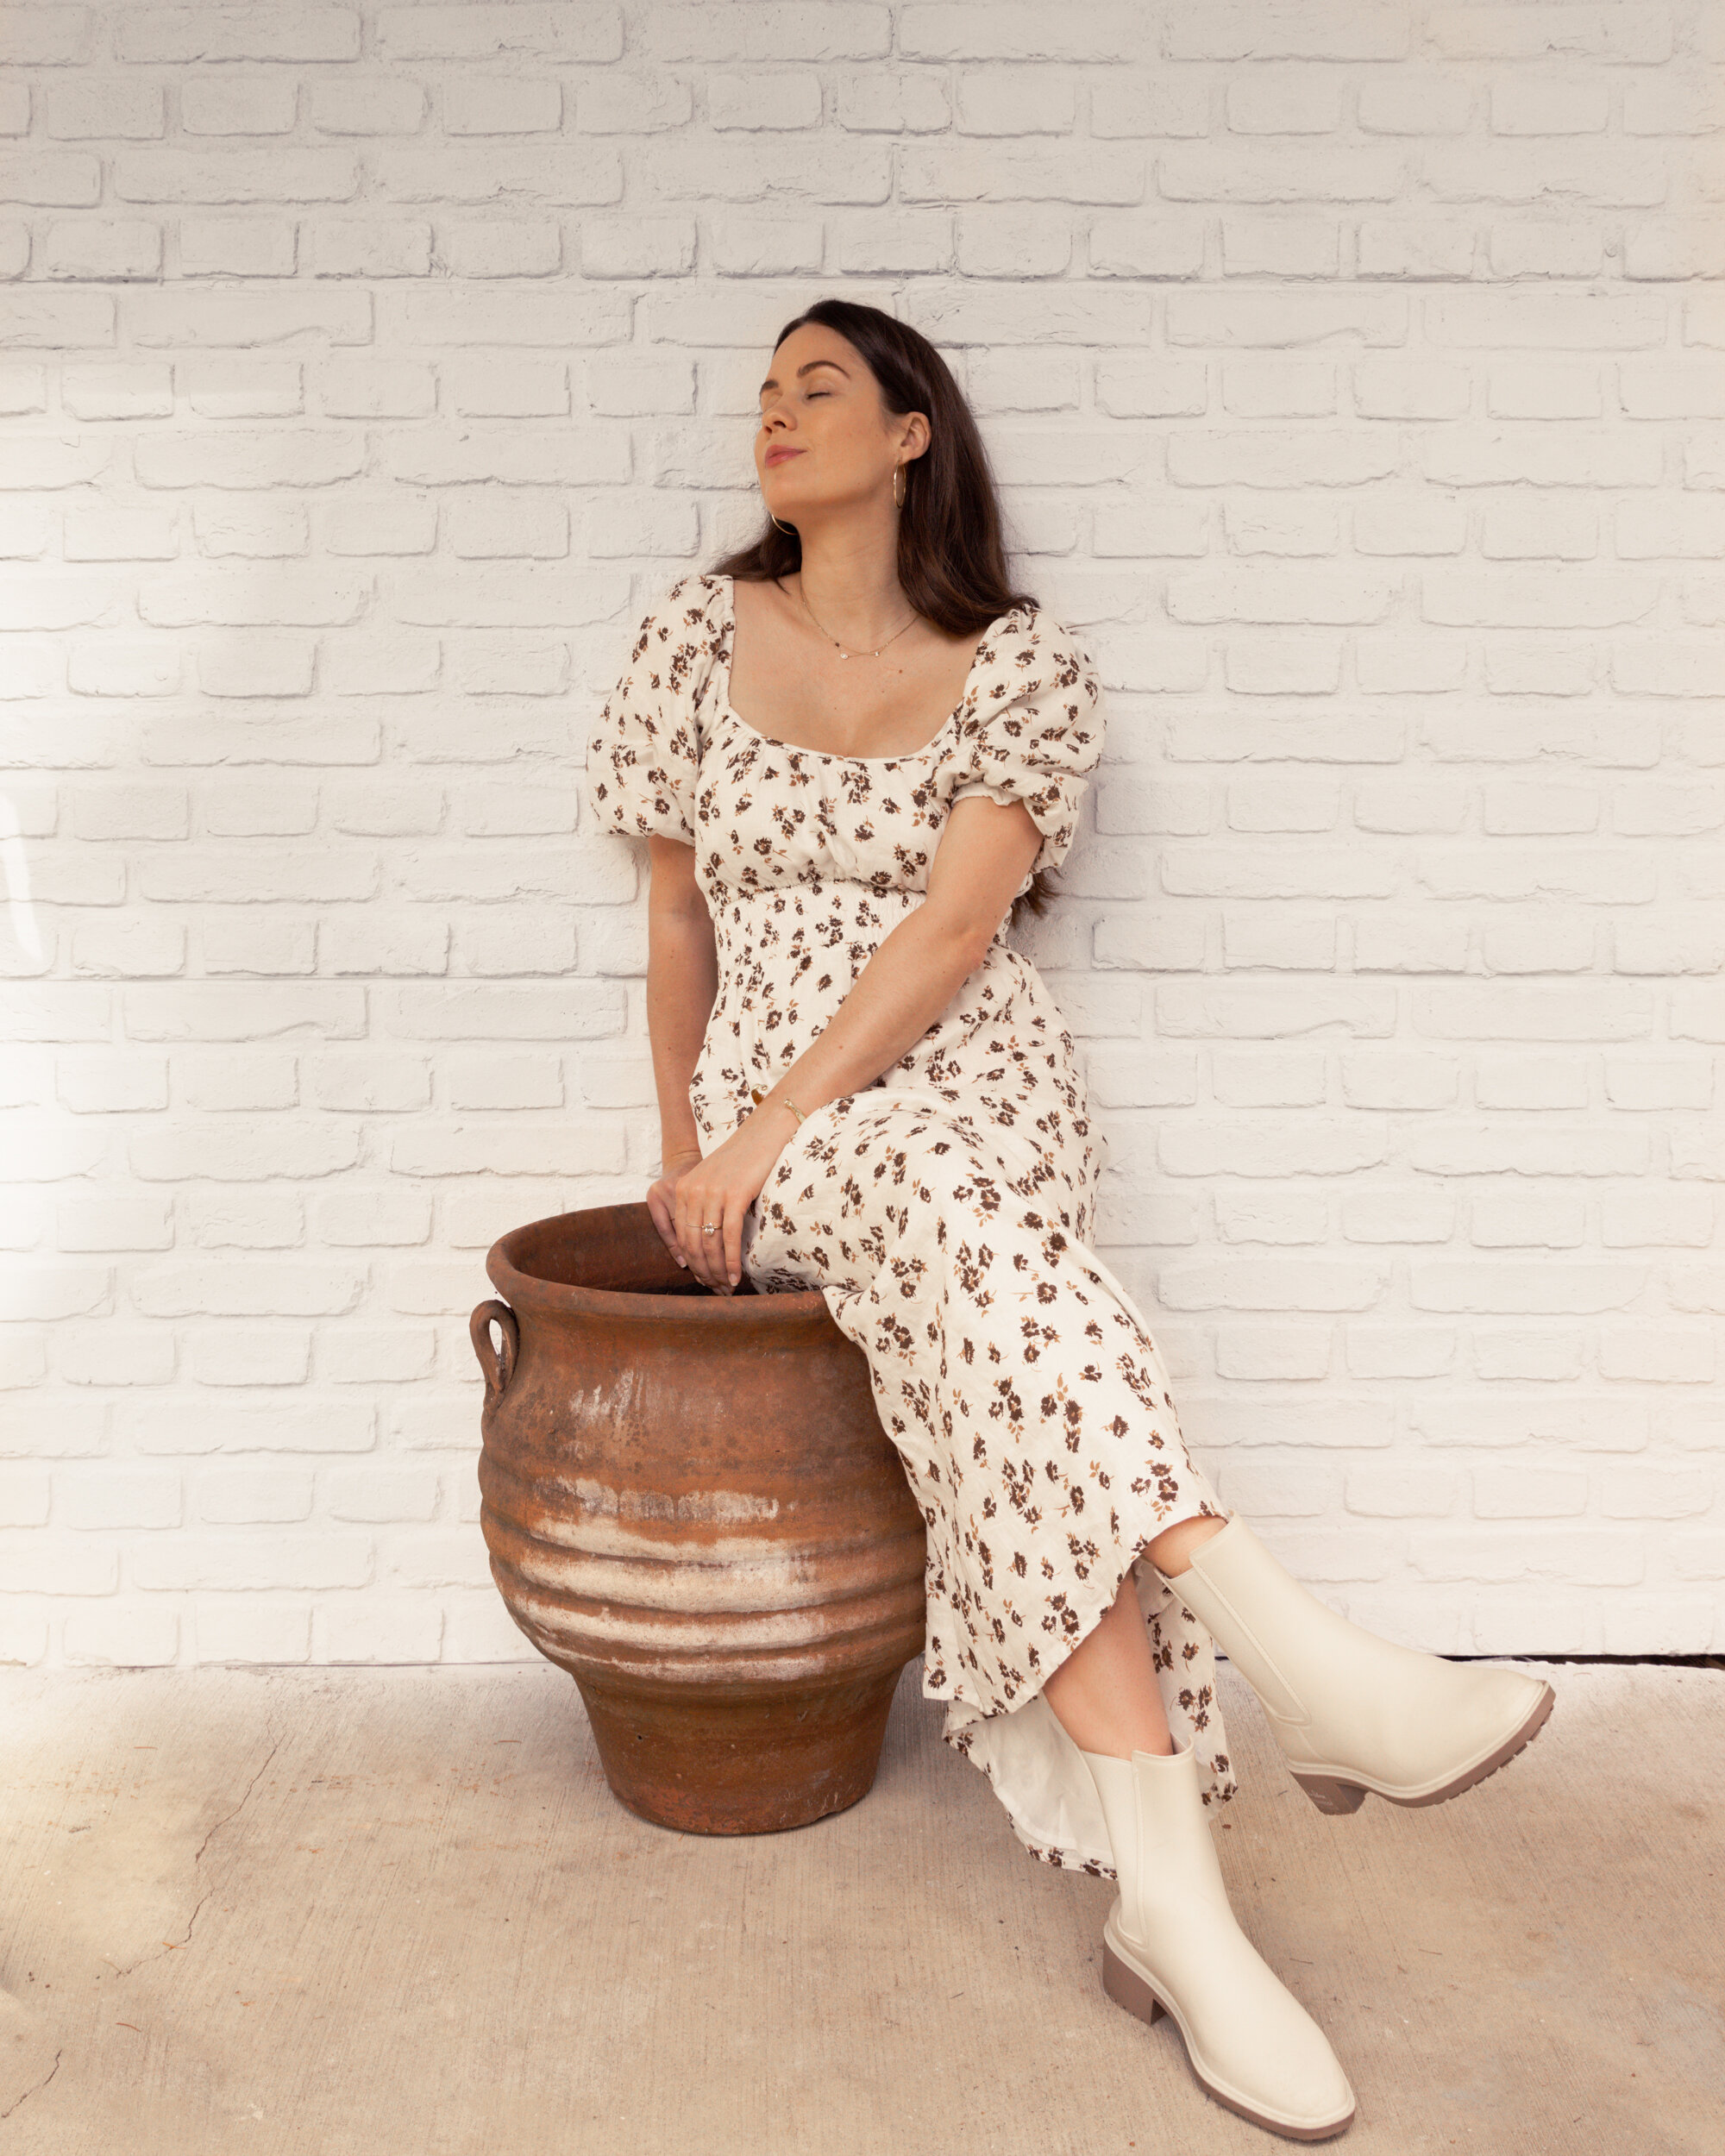 Early Fall Boot Outfit Idea. Sarah Butler of @sarahchristine wearing Faithfull the Brand Shay brown floral midi dress with Sam Edelman Sue Rubber Rain Boot in white Seattle, Washington -10.jpg